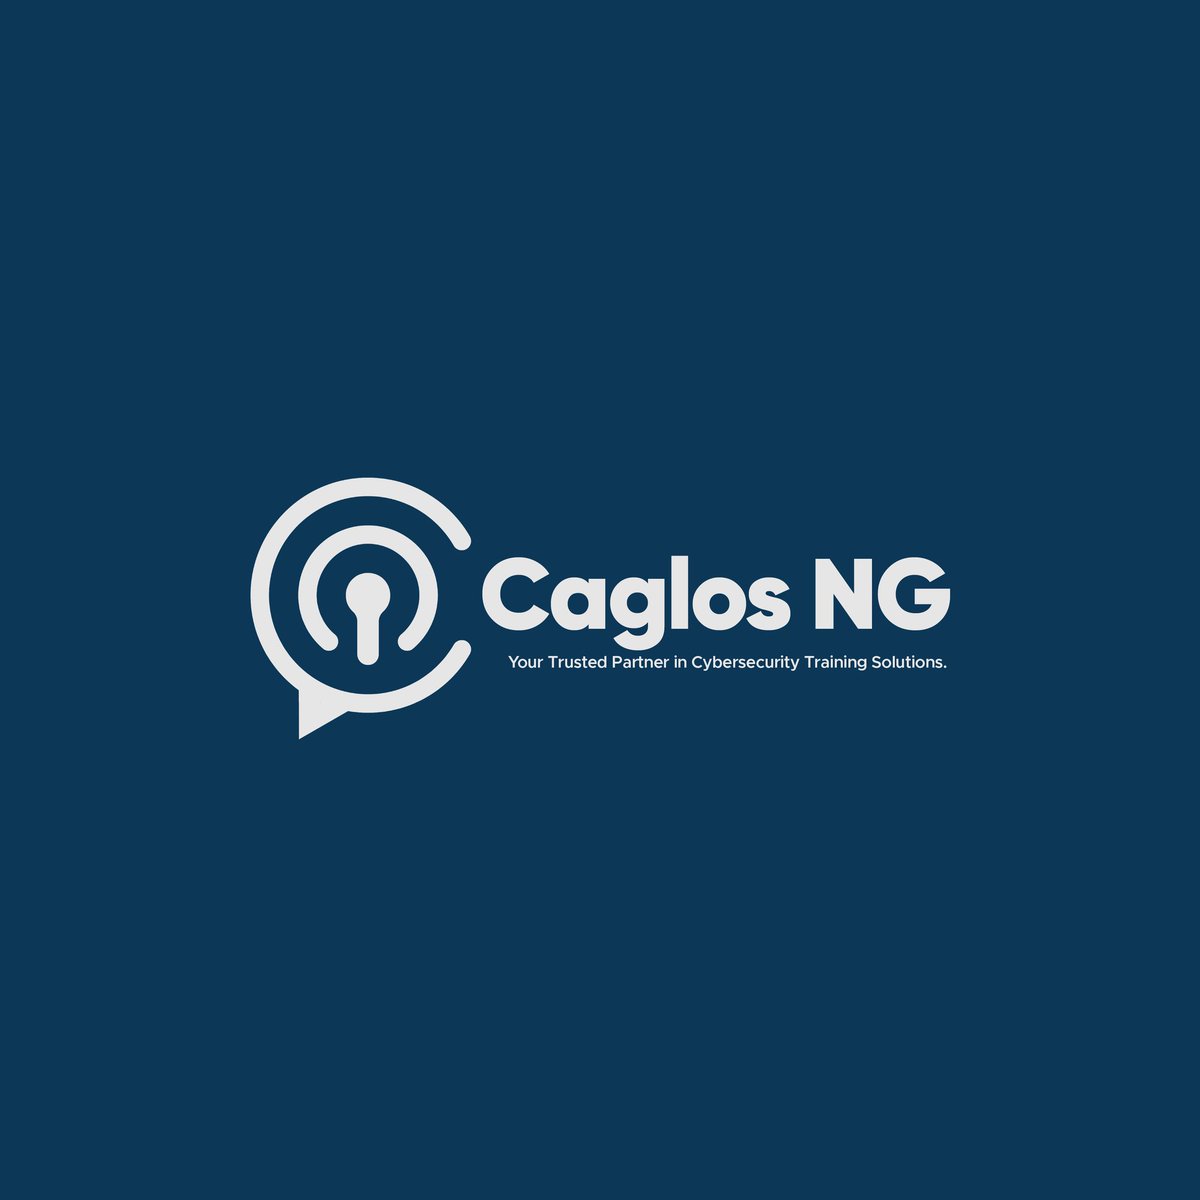 Get Familiar
Caglos NG

 Your Trusted Partner in Cybersecurity Training Solutions.

#ITTraining #CybeSecurity #CaglosNG